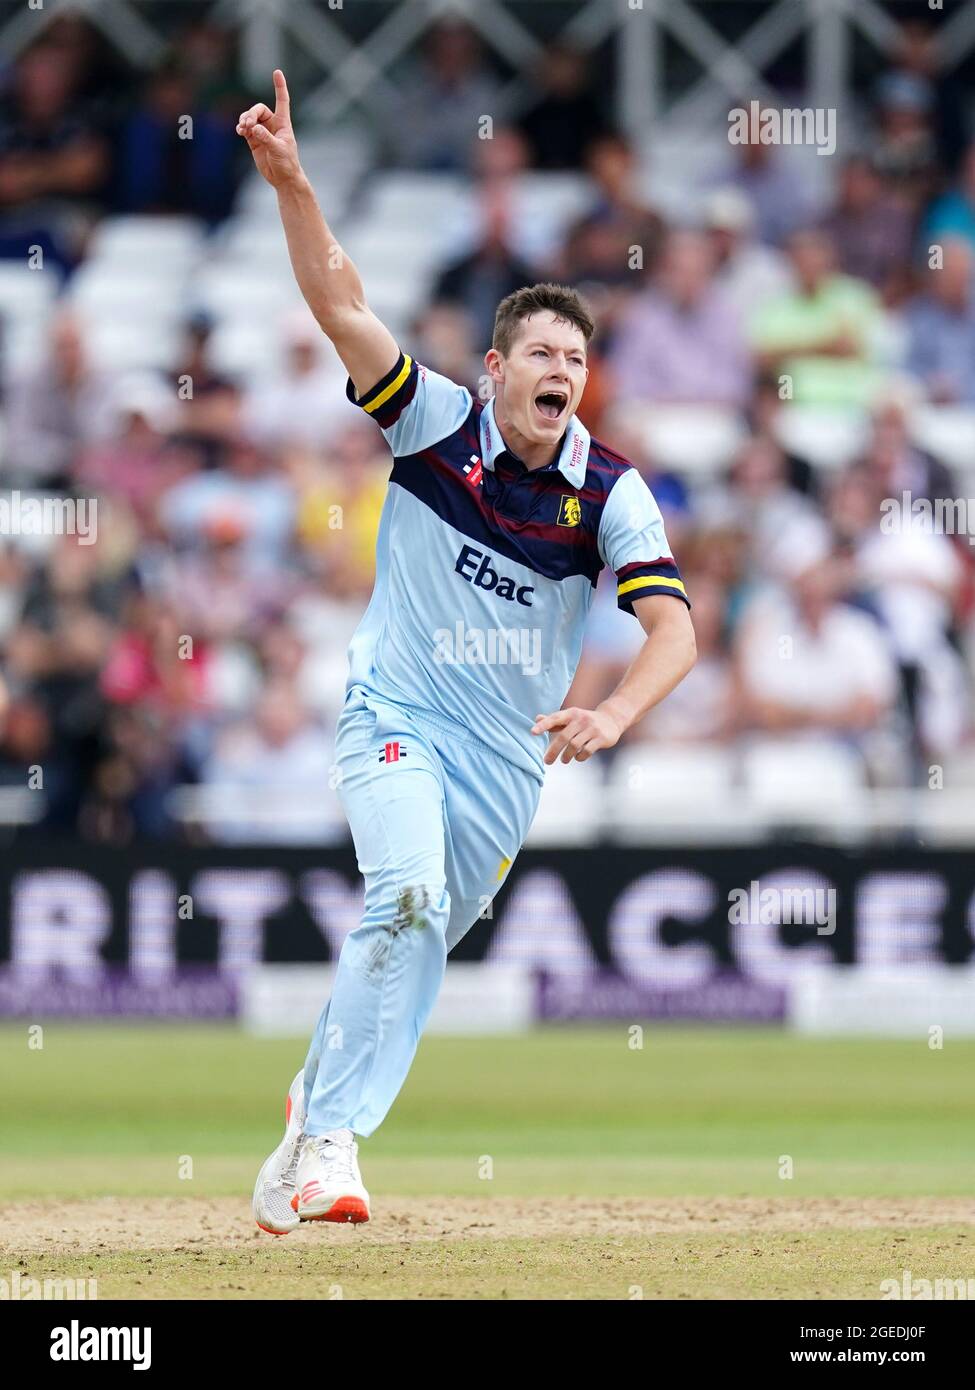 Durham's Matty Potts celebrates taking the wicket of Glamorgan's Kiran Carlson during the Royal London One-Day Cup Final at Trent Bridge, Nottingham. Picture date: Thursday August 19, 2021. See PA story CRICKET Final. Photo credit should read: Zac Goodwin/PA Wire. RESTRICTIONS: No commercial use without prior written consent of the ECB. Still image use only. No moving images to emulate broadcast. Editorial use only. No removing or obscuring of sponsor logos. Stock Photo